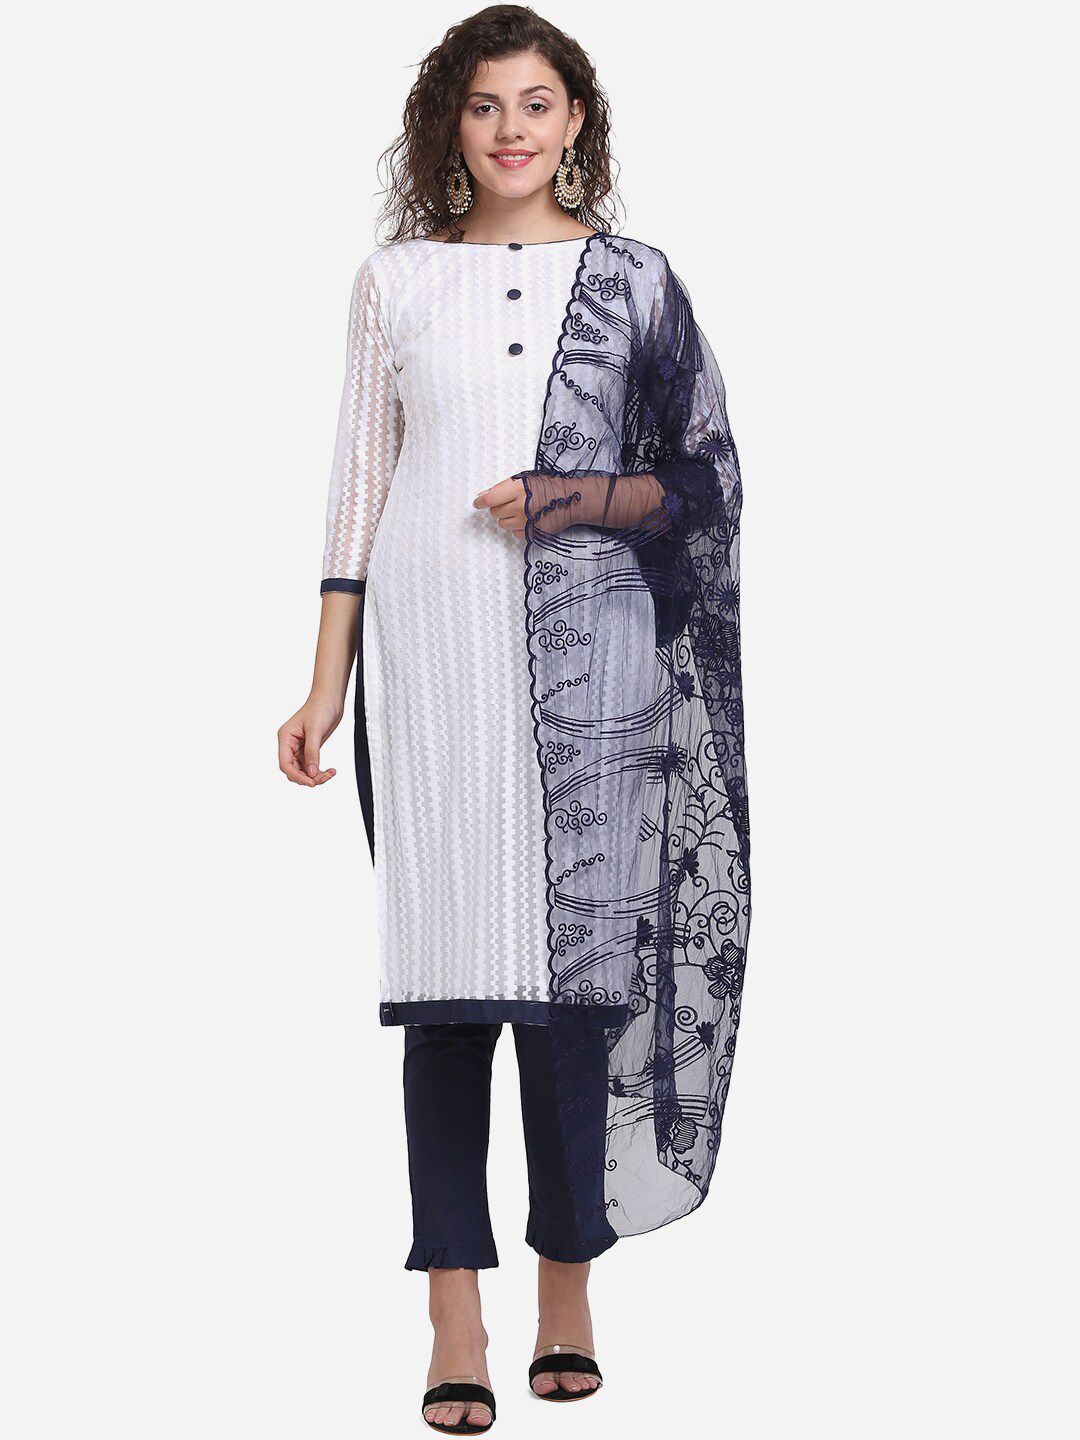 mf White & Navy Blue Unstitched Dress Material Price in India